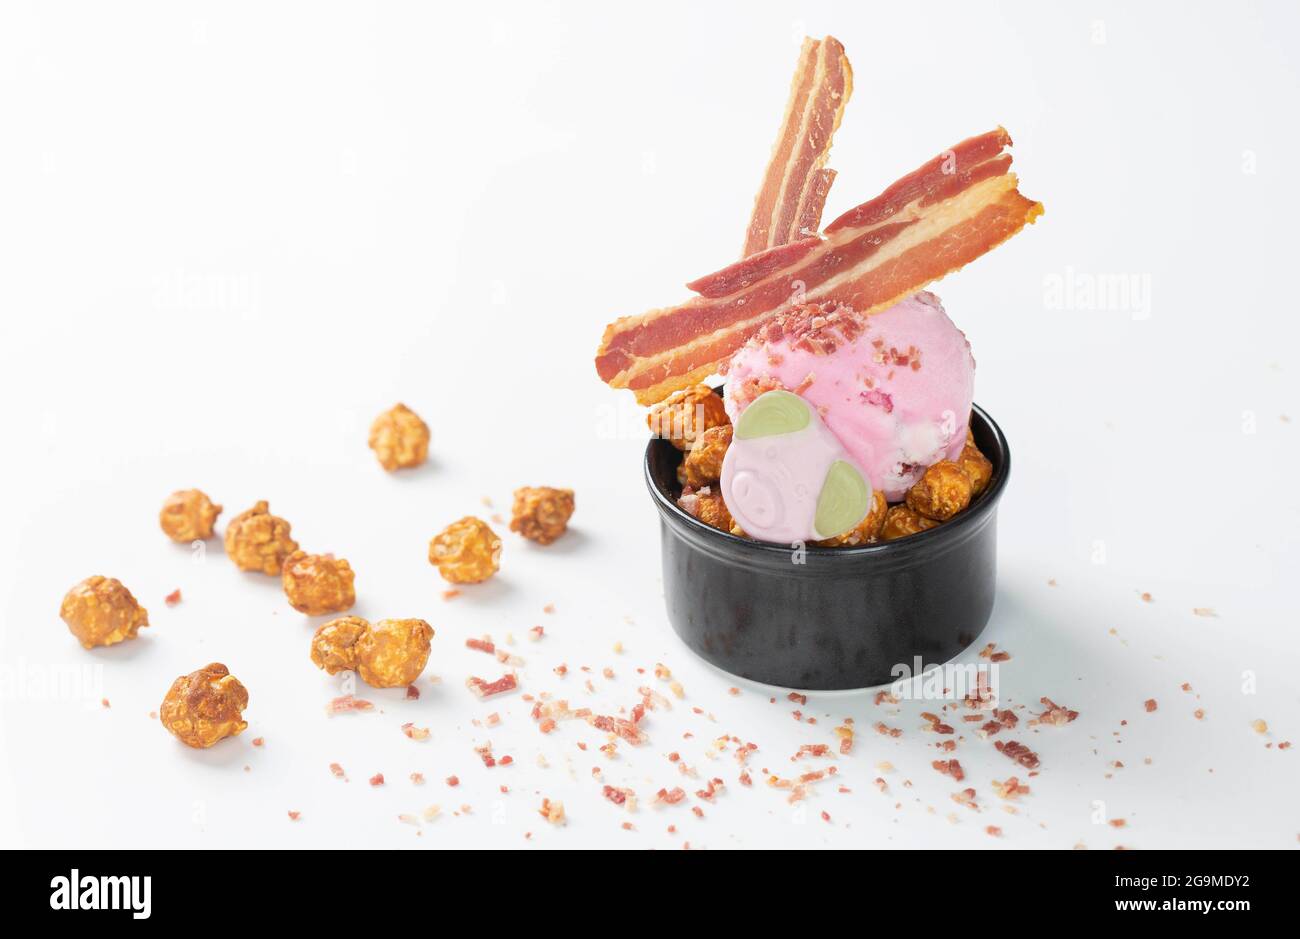 EDITORIAL USE ONLY The 'Don’t be Disgruntled' flavour, featuring Percy Pig ice cream with crunchy bacon bits and a Percy Pig sweet from Ocado's 'A Serving Just for You' menu of 10 new flavours created by Gastro-physicist, Jozef Youssef, which have been scientifically designed to match different moods and occasions. Issue date: Tuesday July 27, 2021. Stock Photo